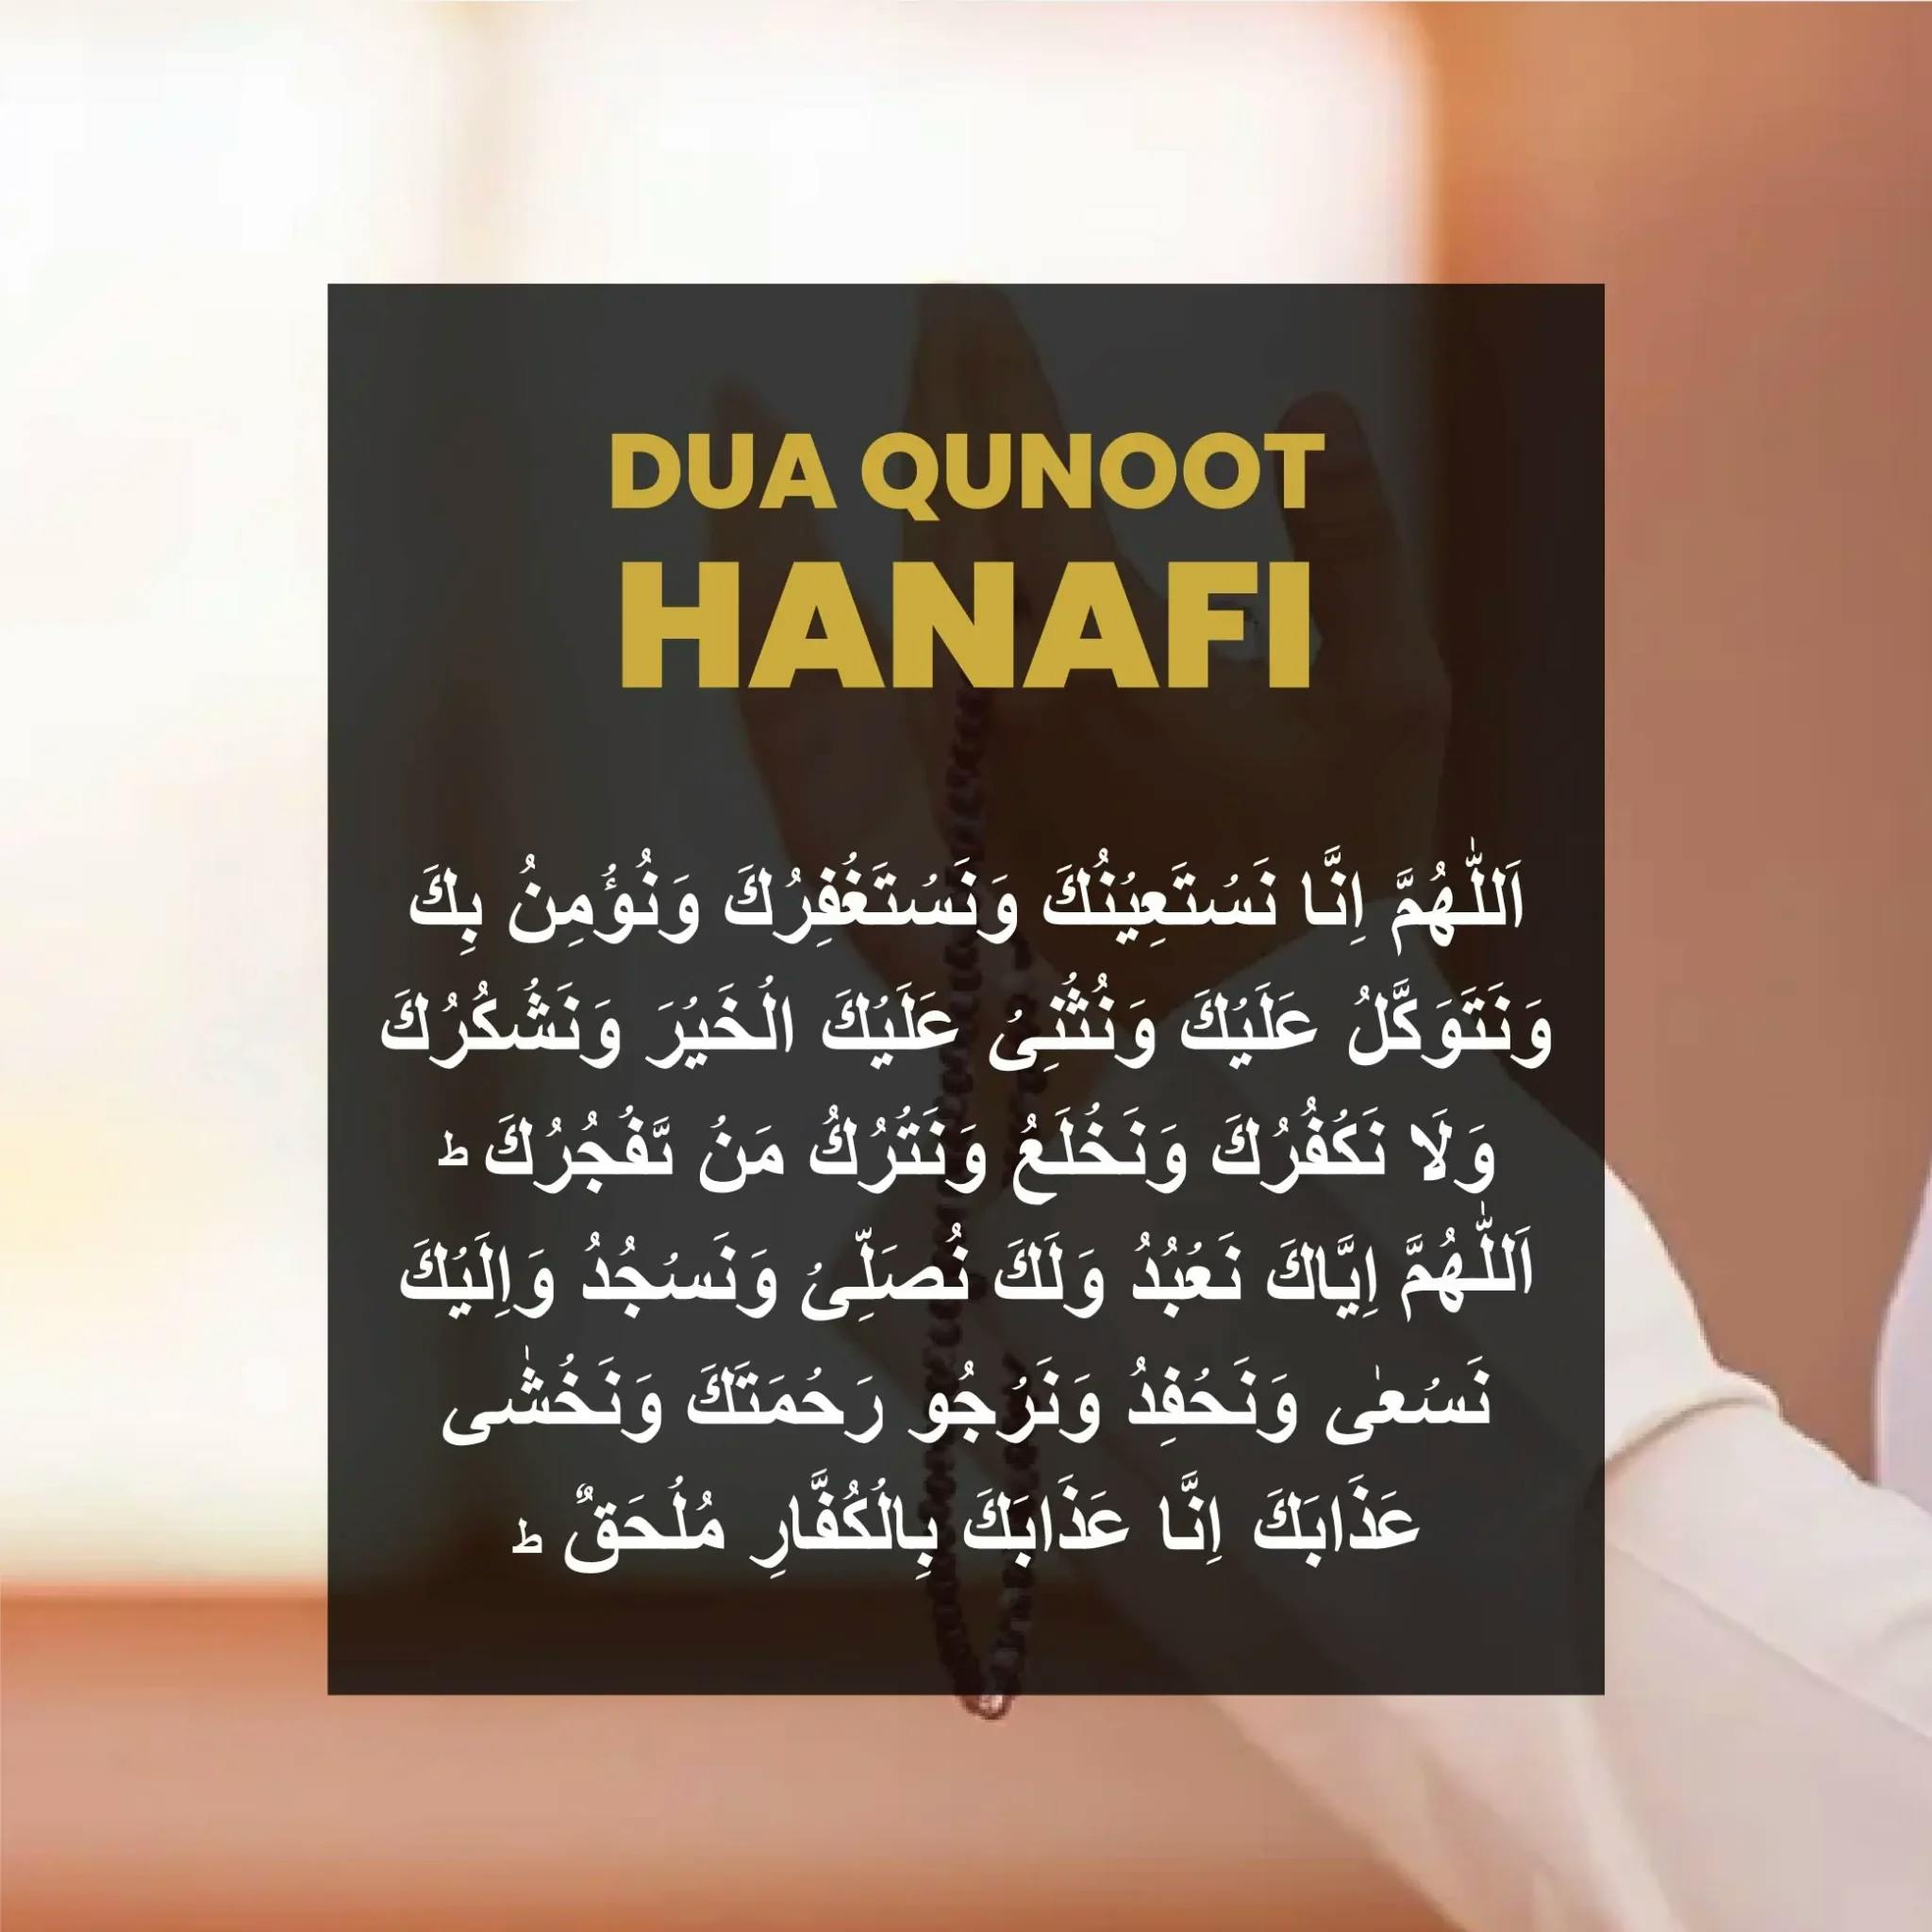 Dua e Qunoot hanfi or duas for qunoot or witr dua  is being used in the witr namaz or salah while offering the 3rd witr rakat.